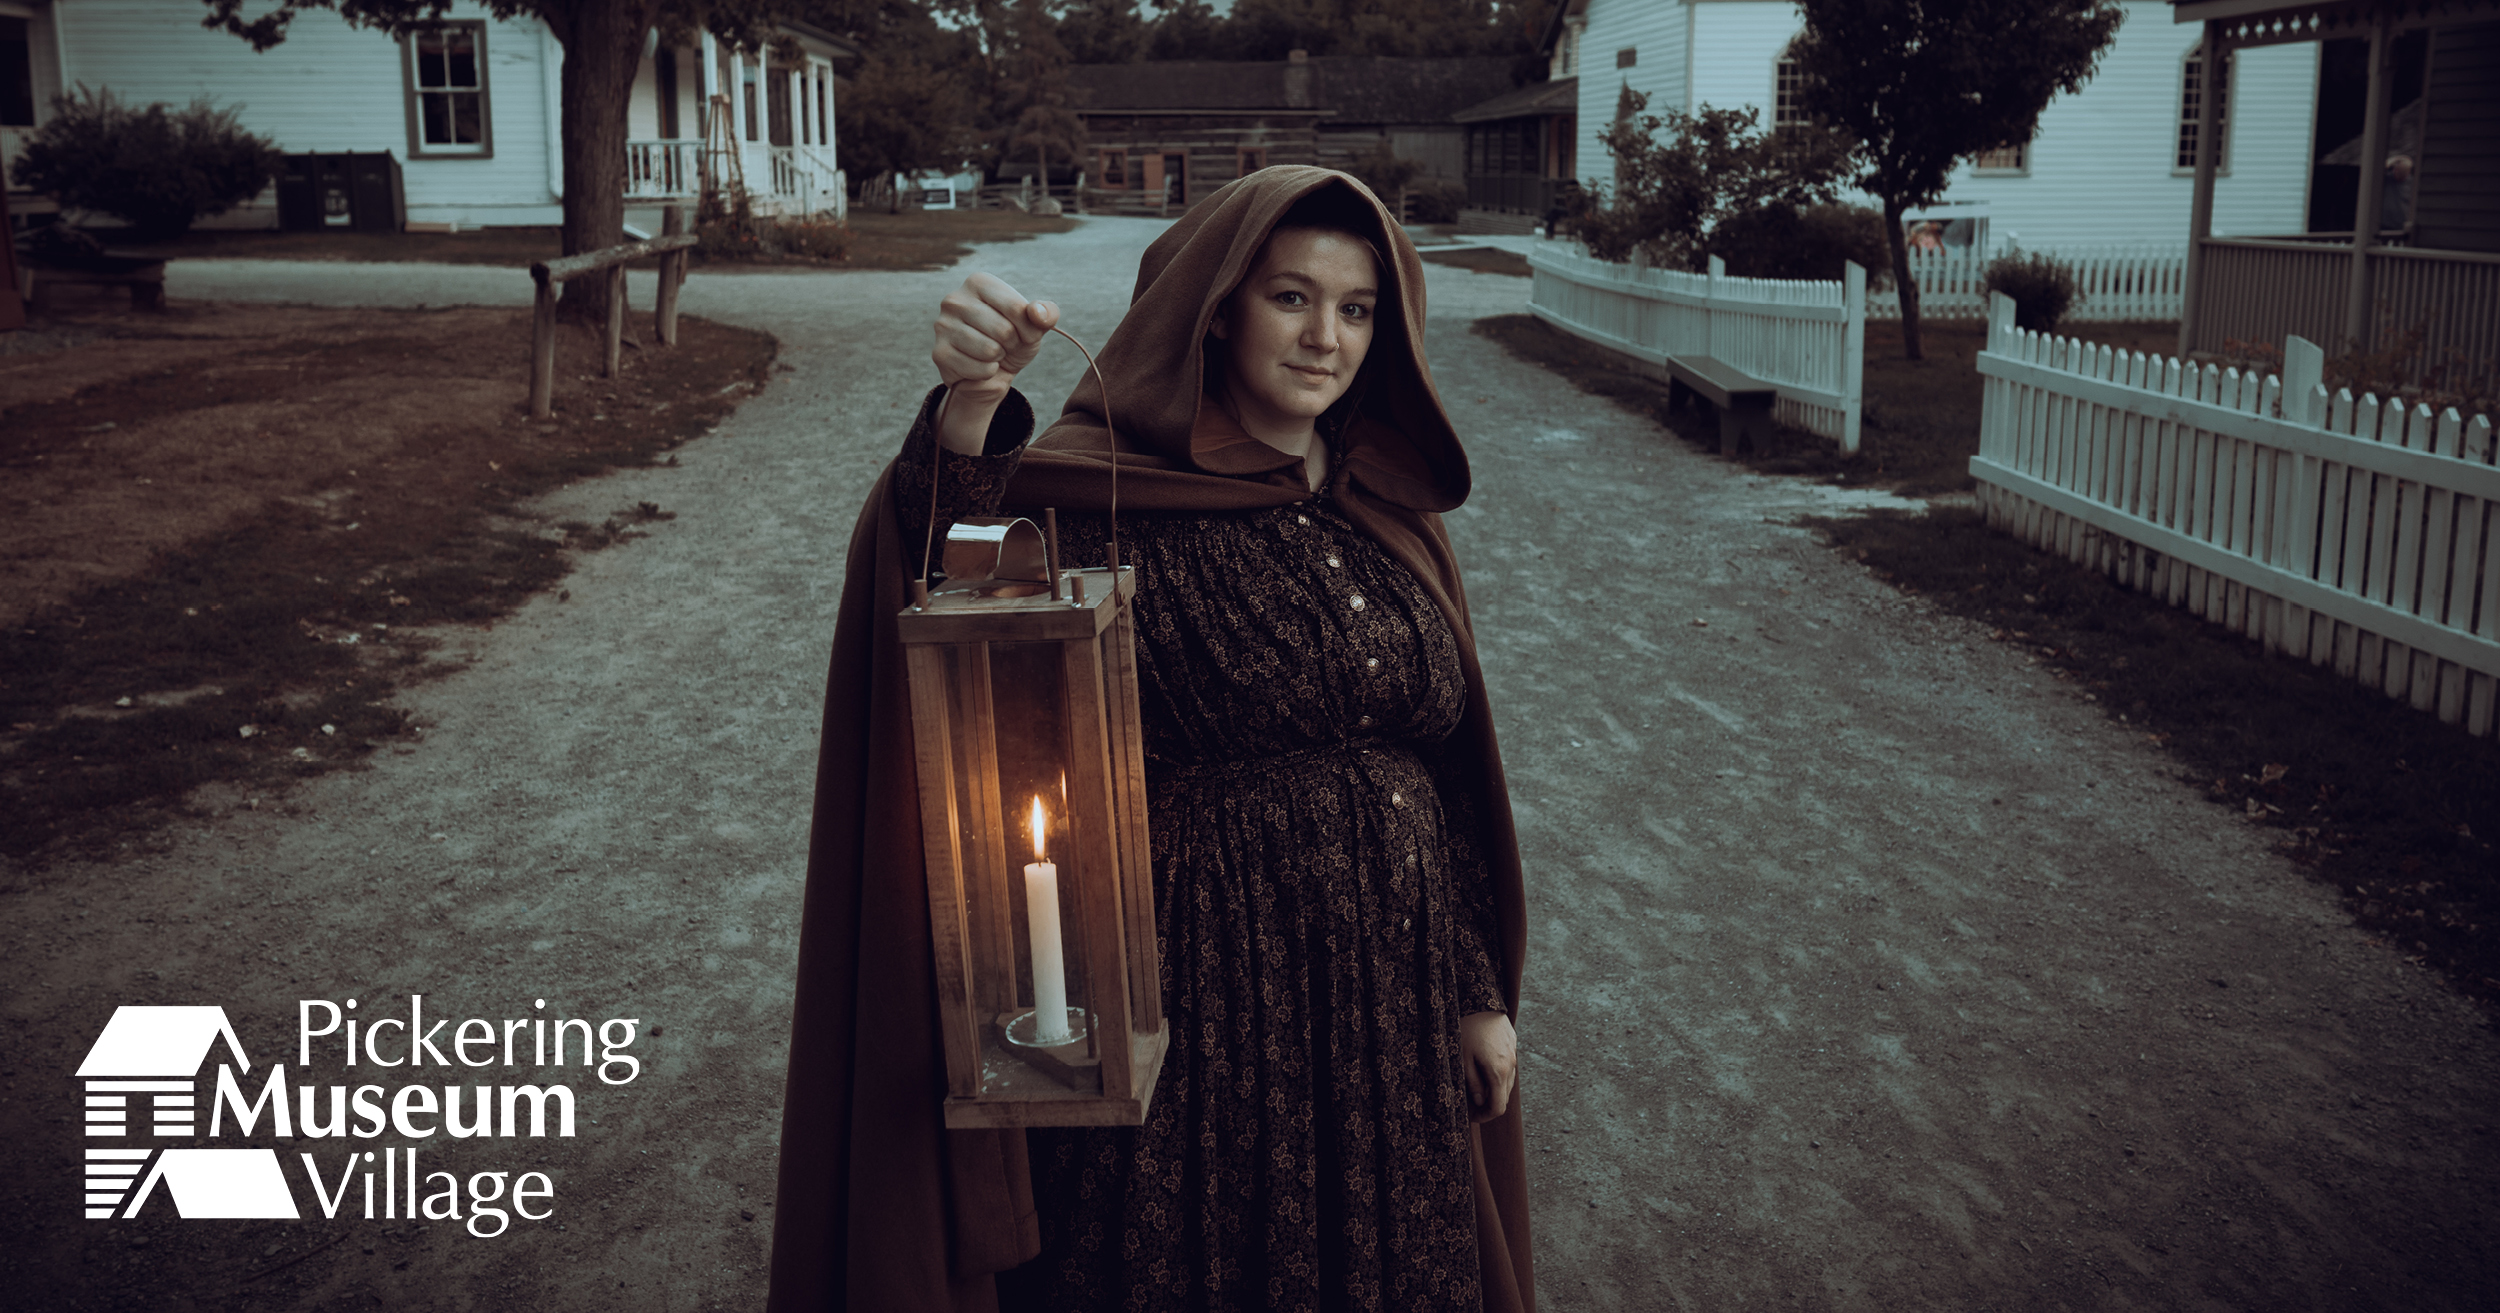 Image of a woman wearing a black cloak and holding a lantern in front of old buildings.